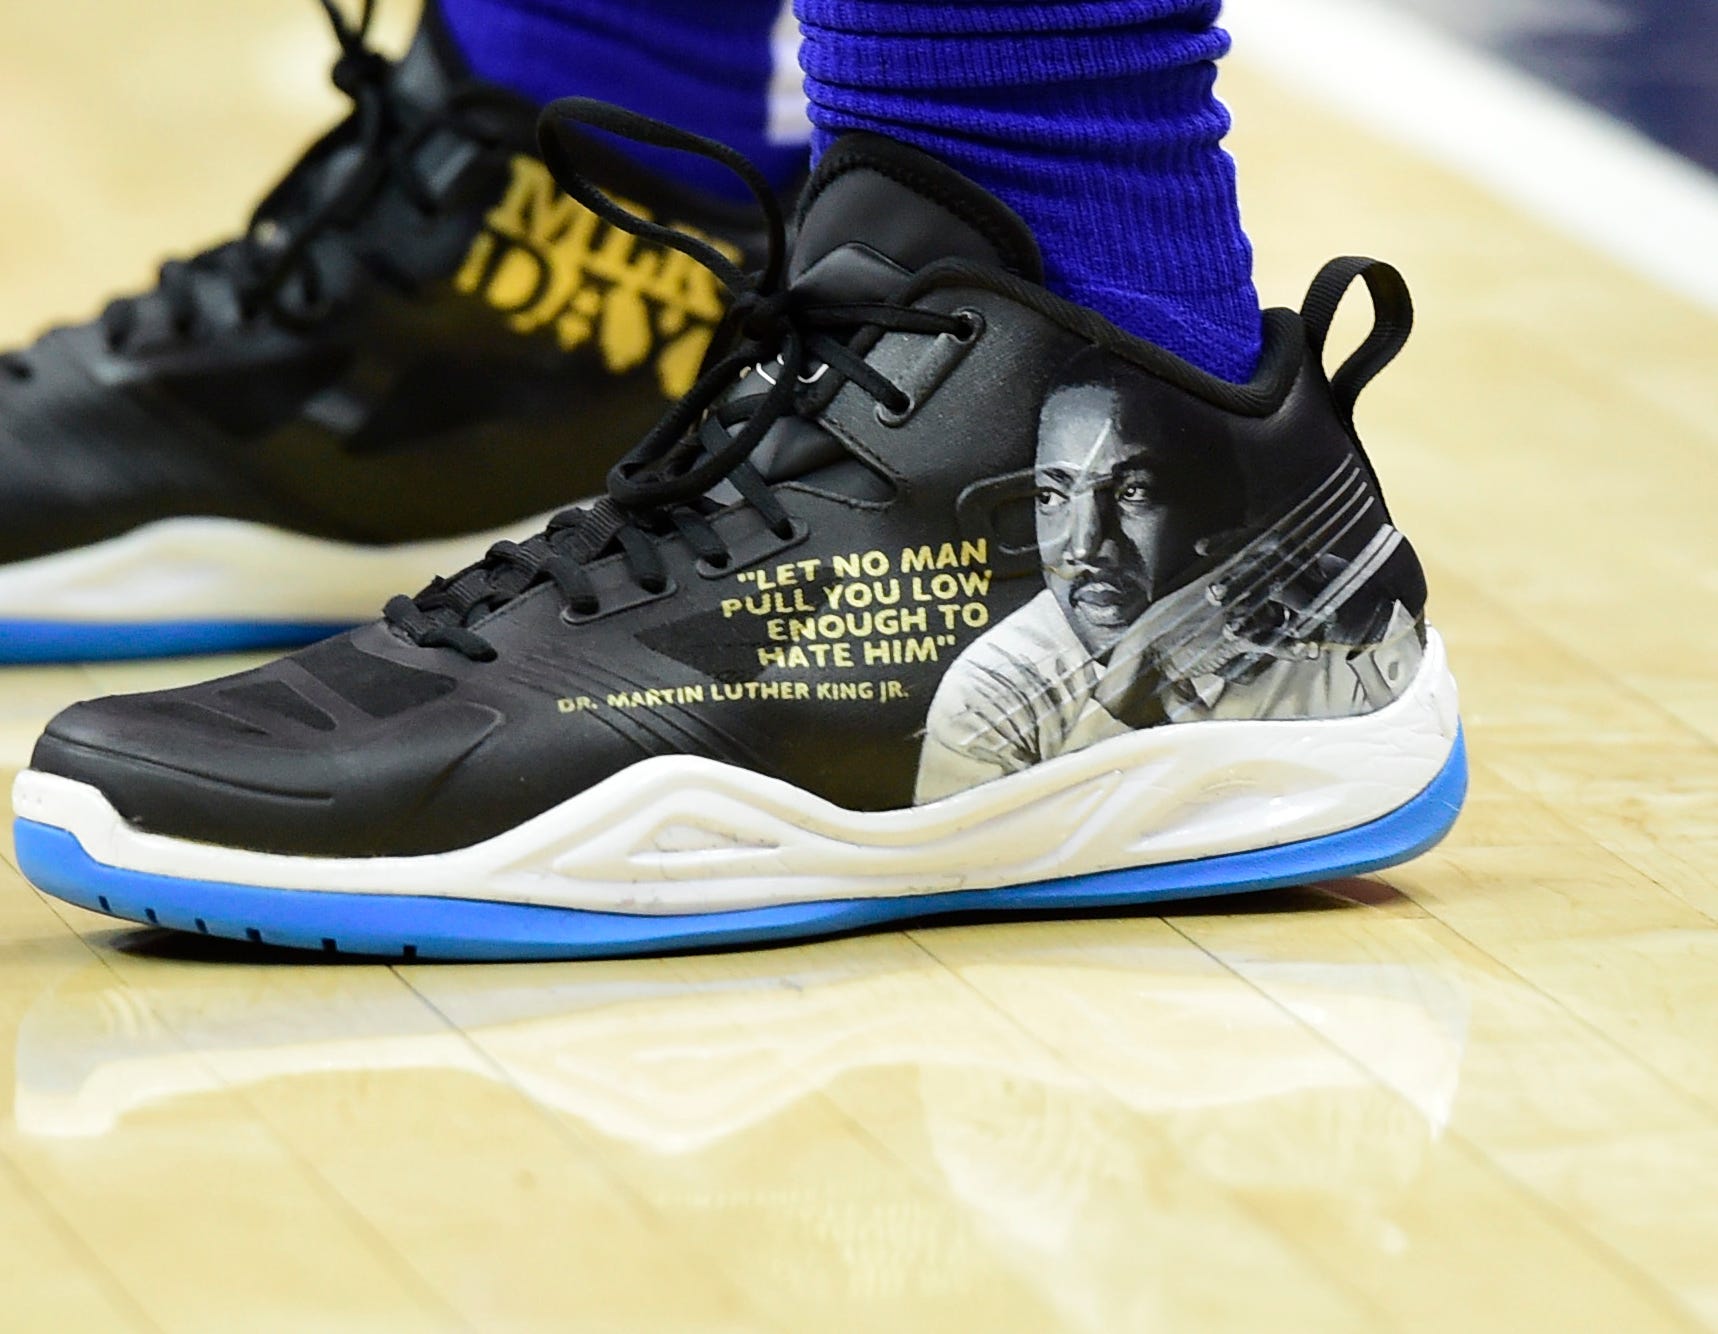 Nba S Custom Shoe Trend Is More Than Just A Fashion Statement